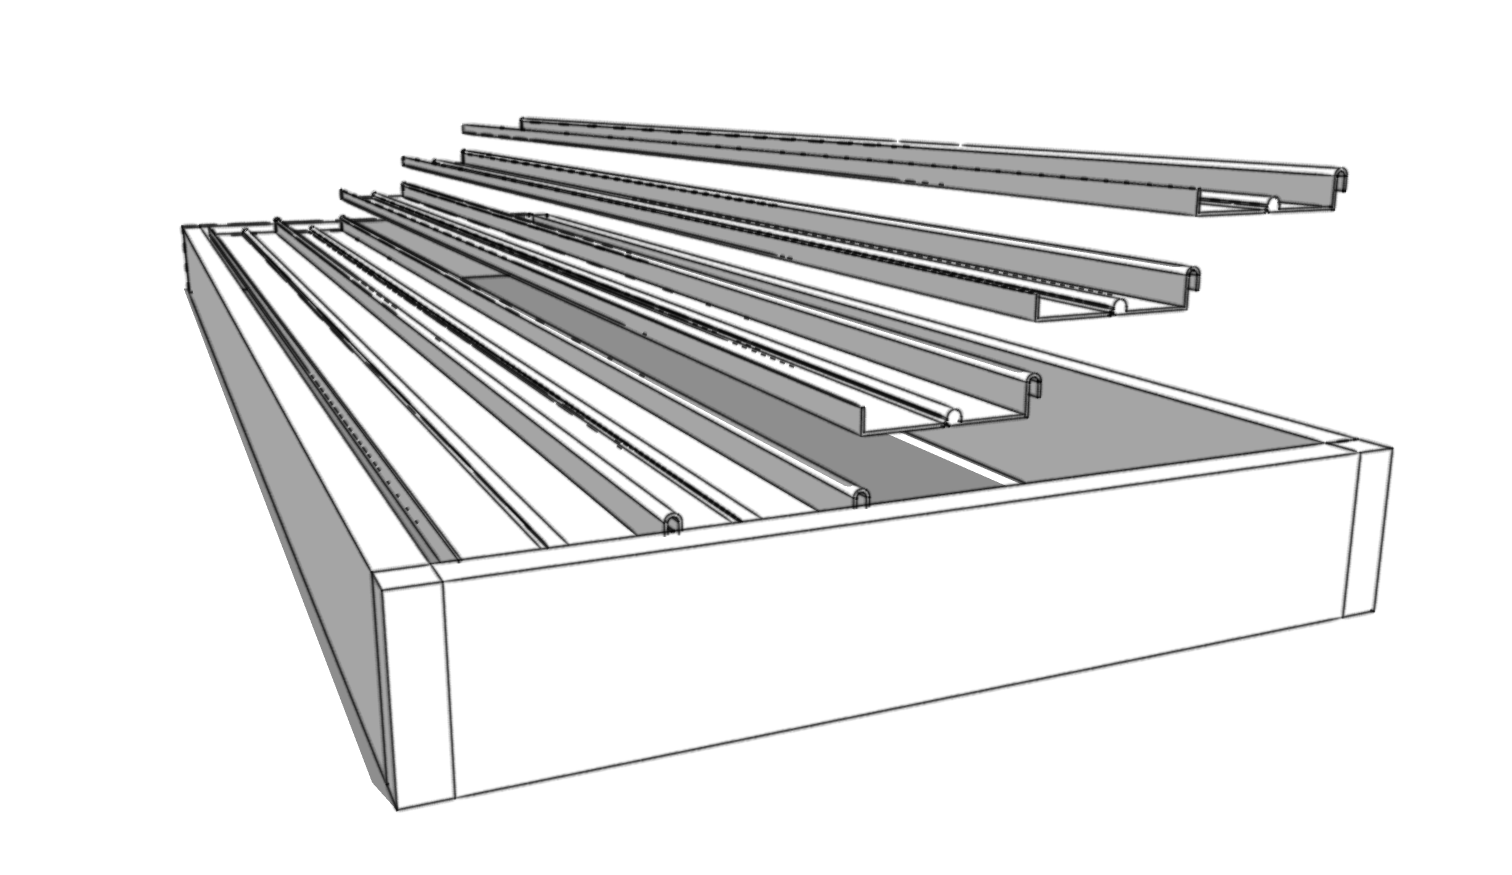 Array of aluminum louvers on pergola bay structure.